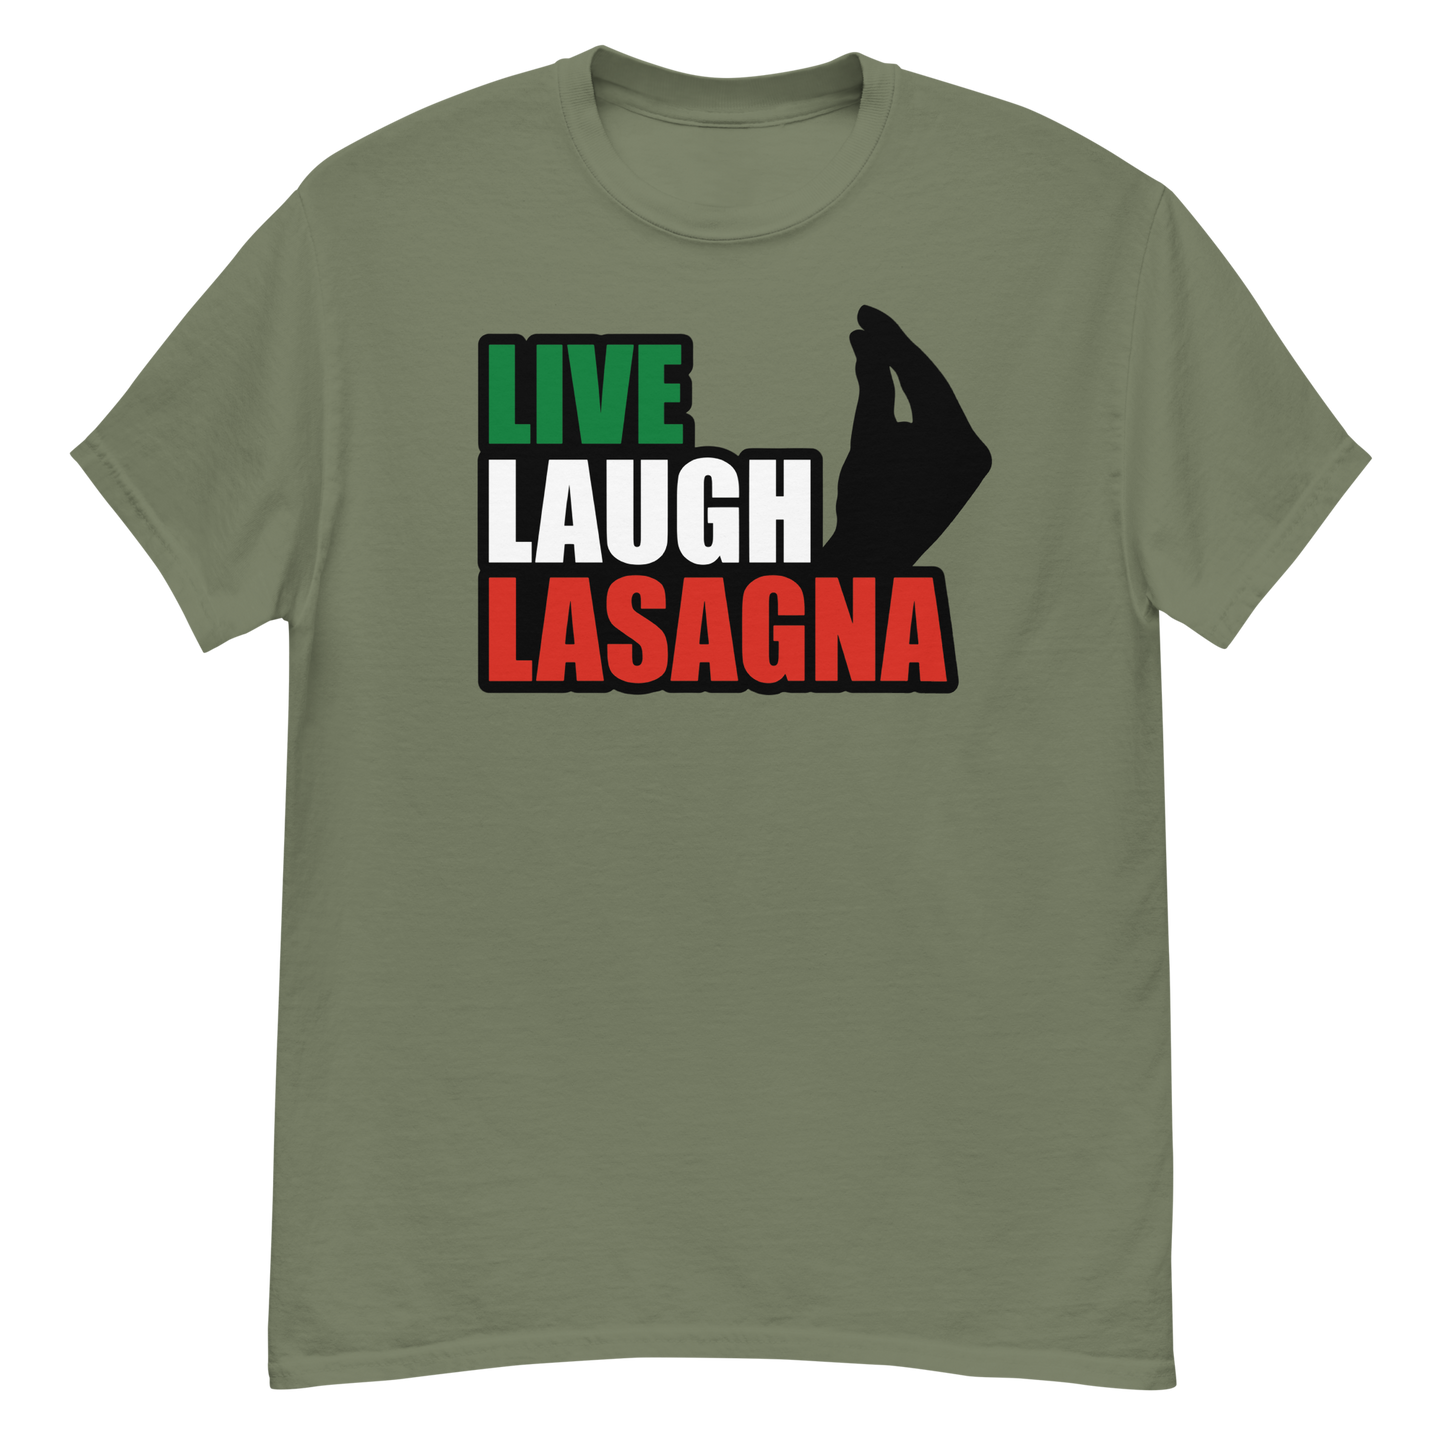 Live, Laugh, Lasagna Capiche T-Shirt: Embrace Life, Laughter, and Italian Flavor- Vintage Tee for Italians